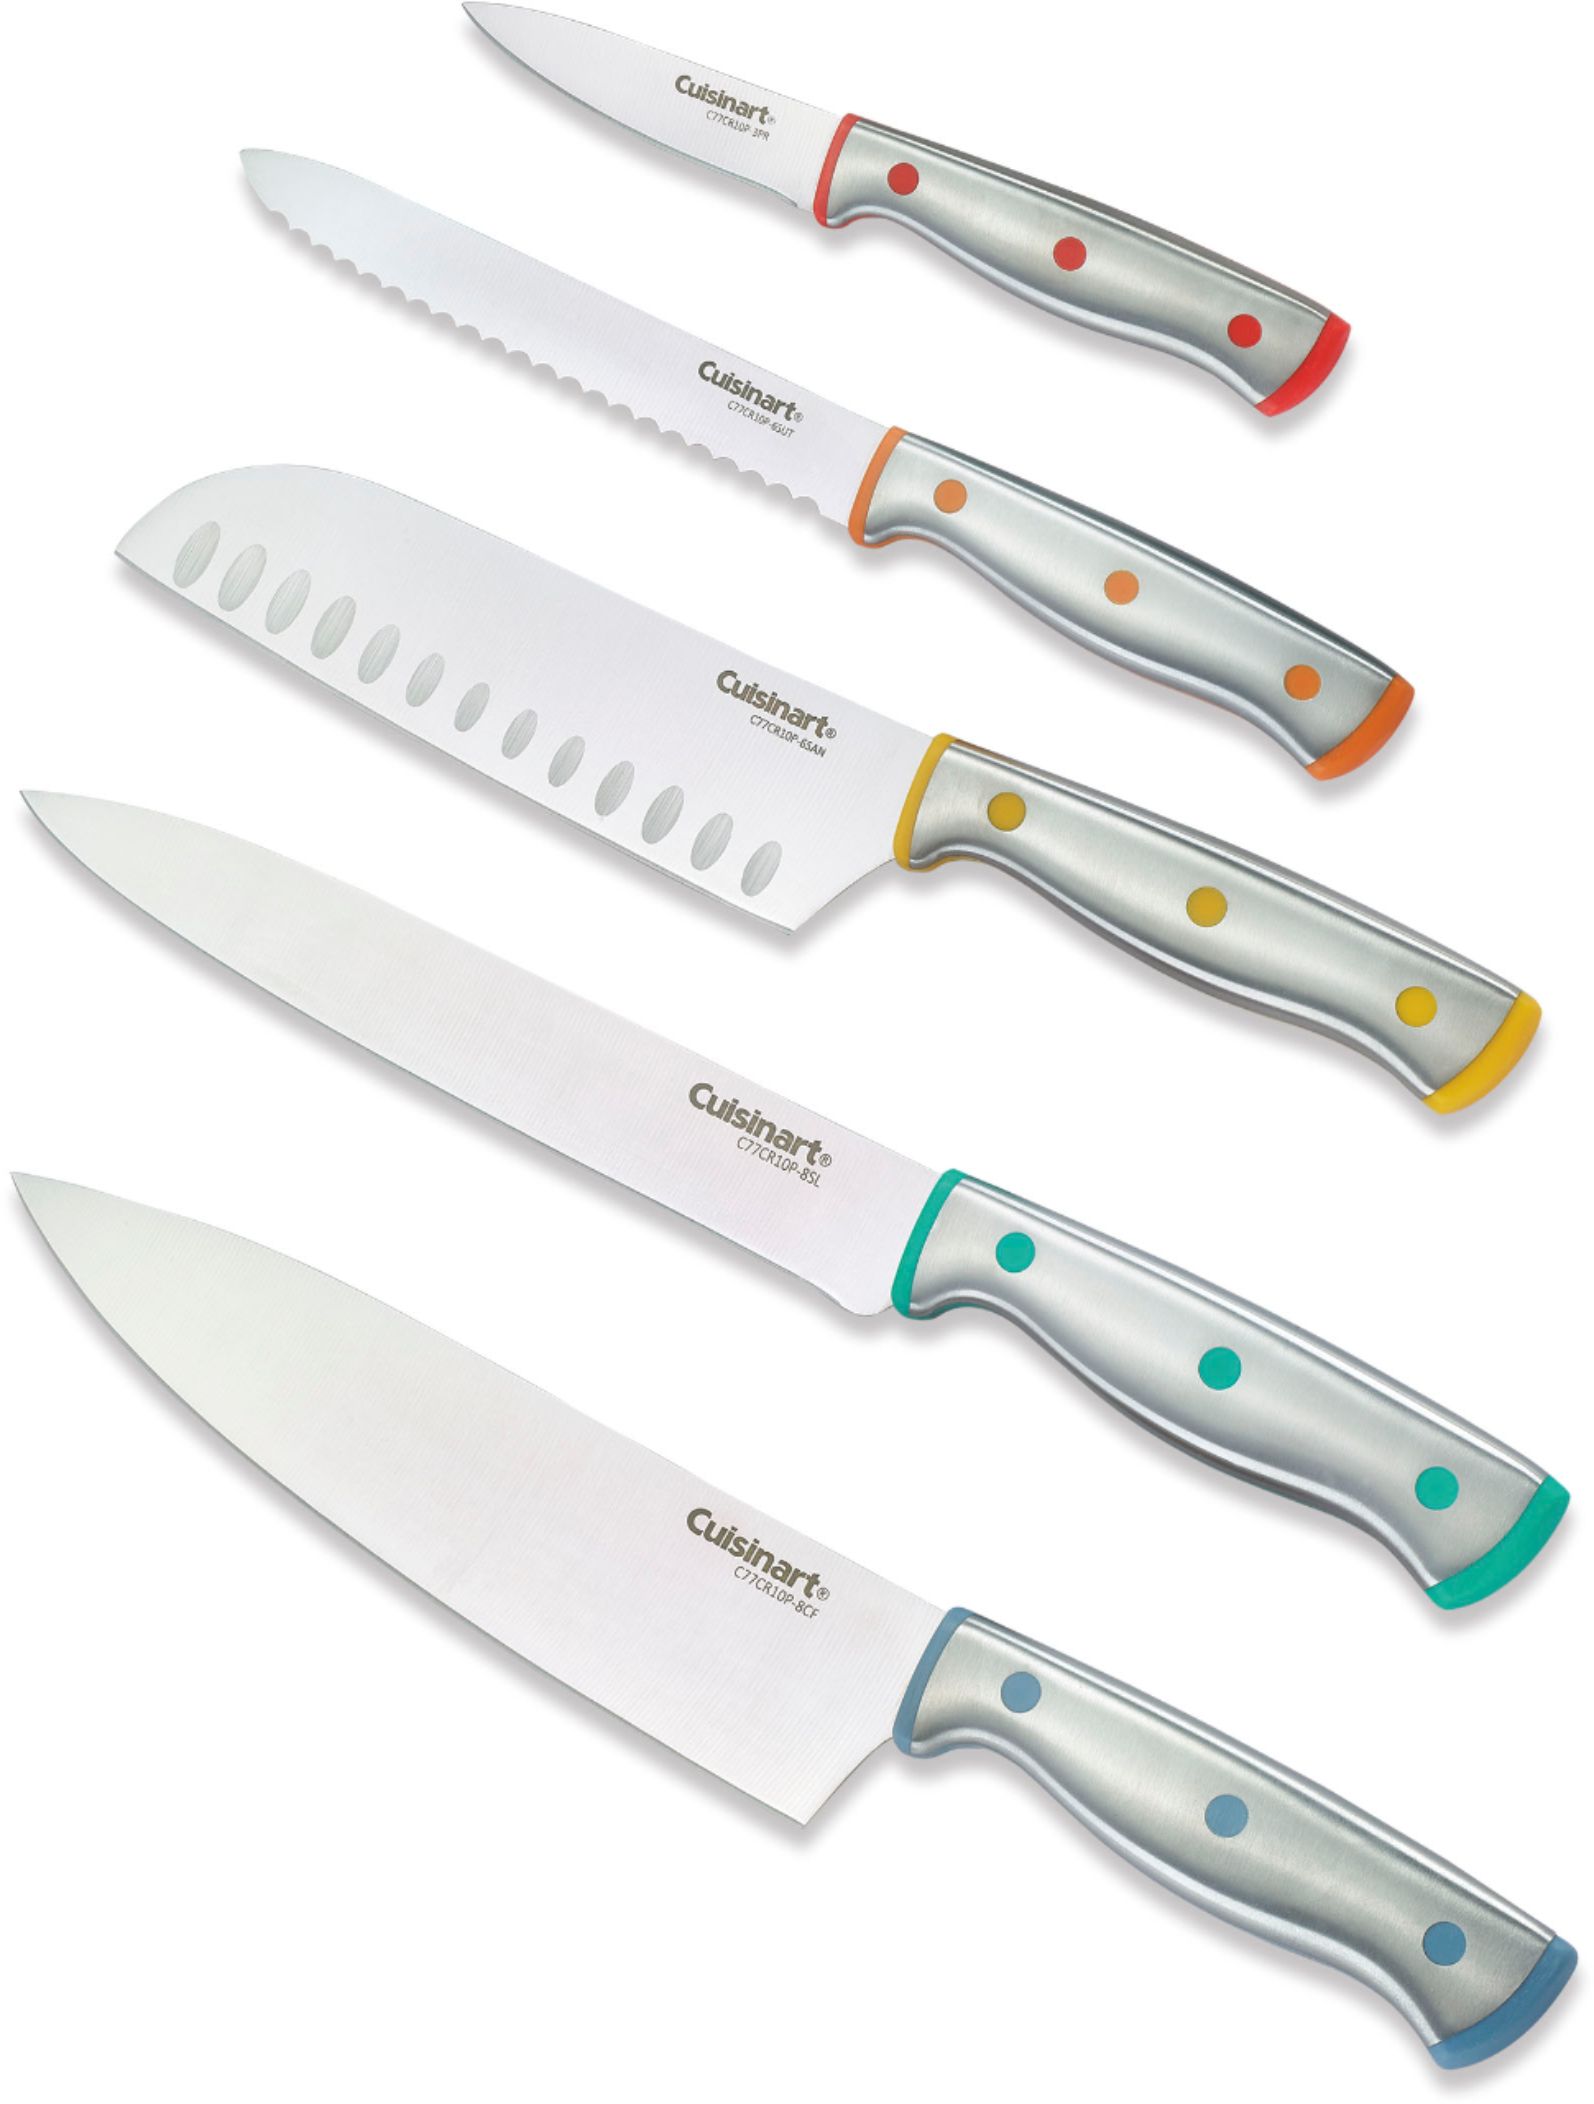 Cuisinart 10-Pc. Ceramic-Coated Cutlery Set with Blade Guards $13.99